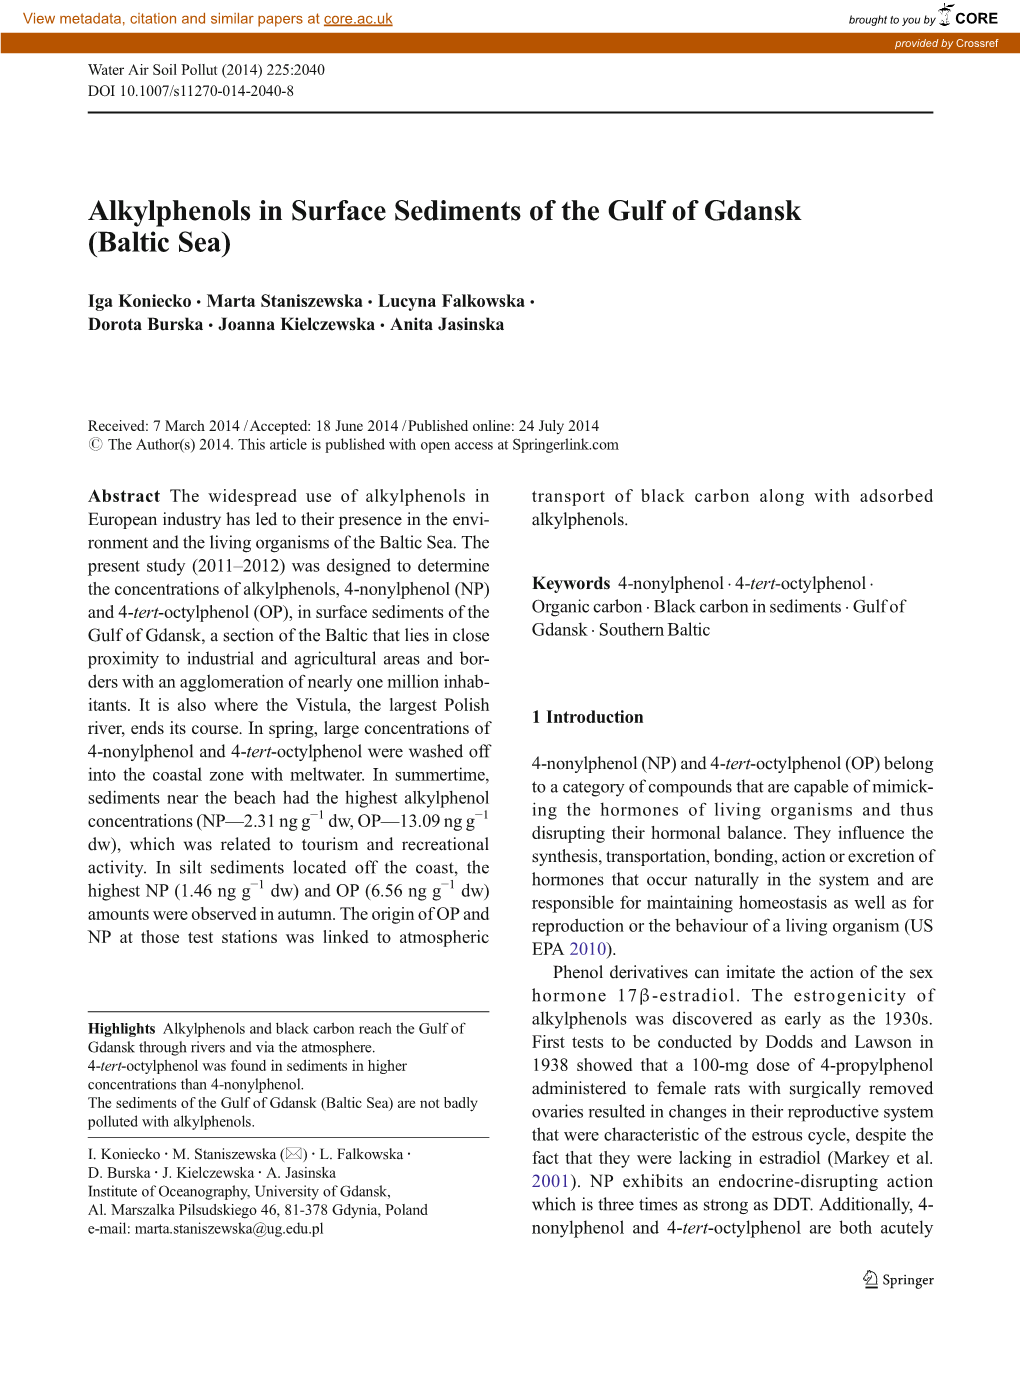 Alkylphenols in Surface Sediments of the Gulf of Gdansk (Baltic Sea)